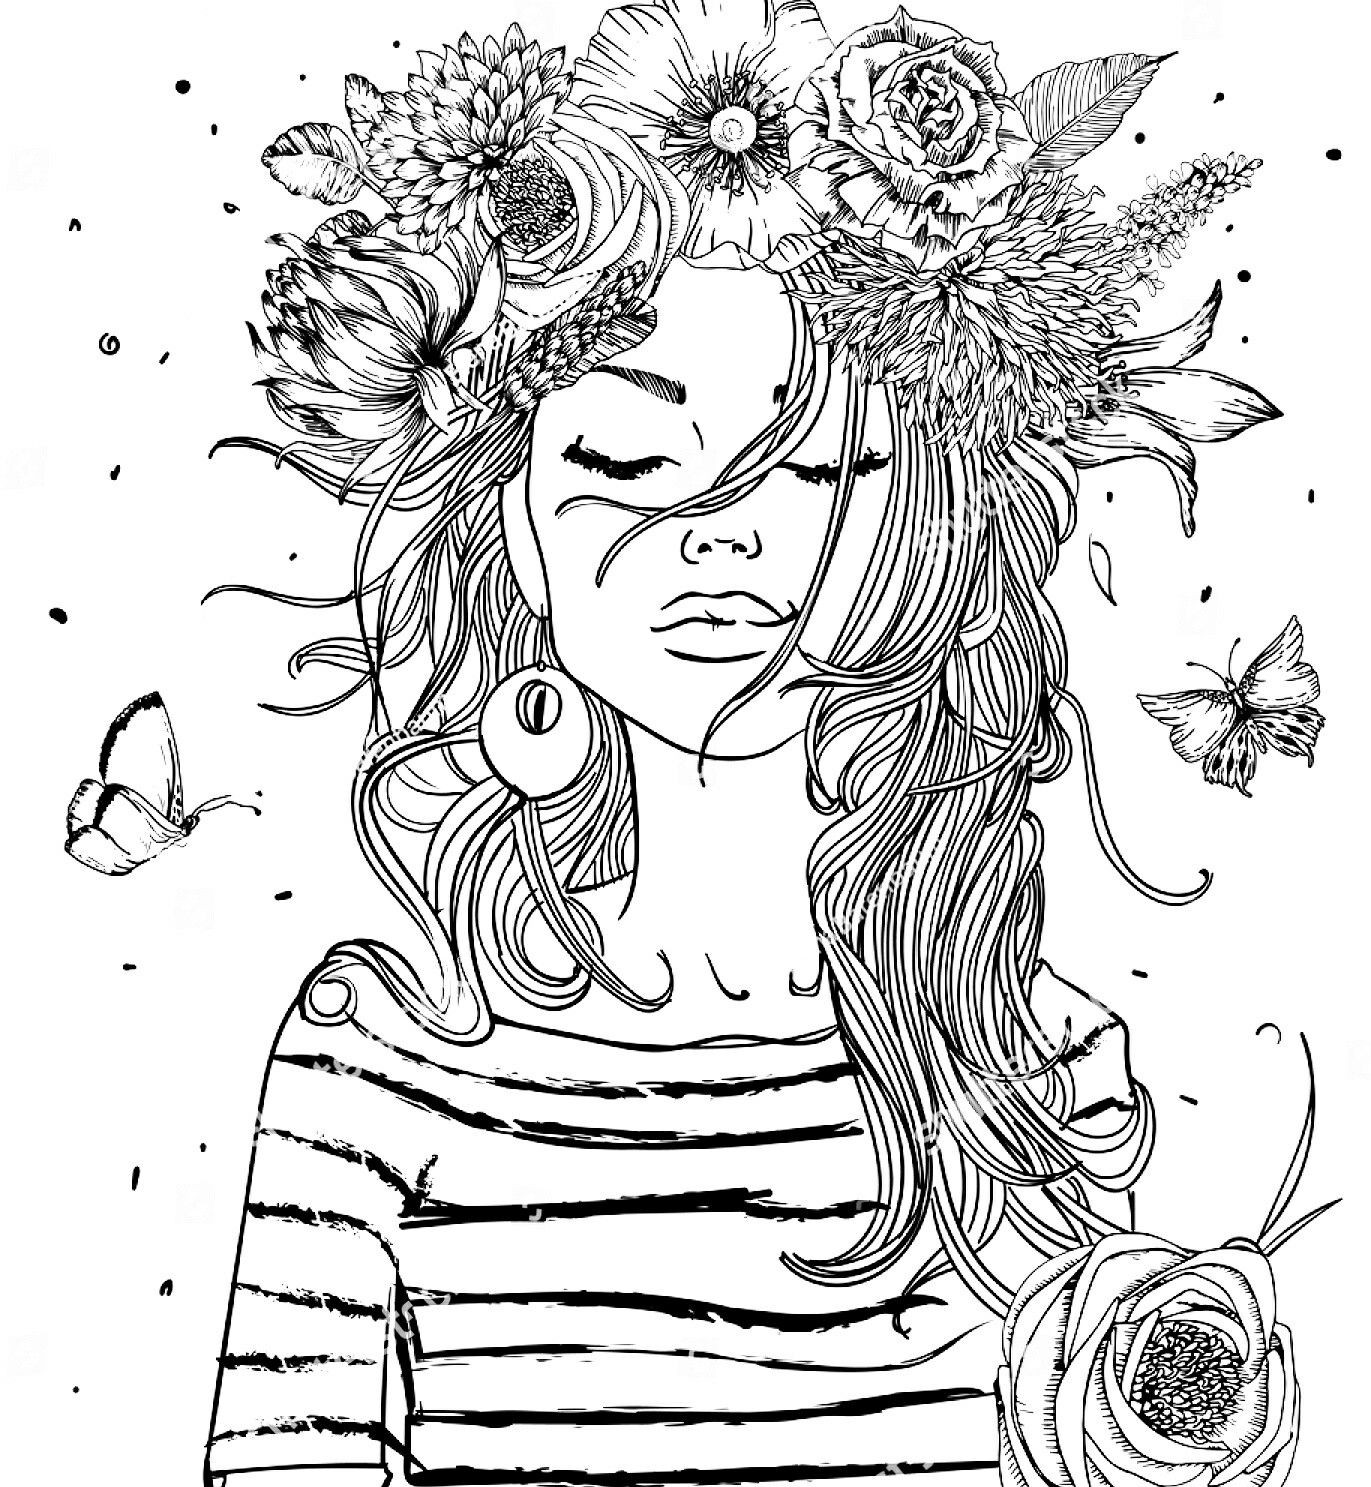 Coloring Pages Of Girls For Adults
 Pin by monica markin on coloring pages